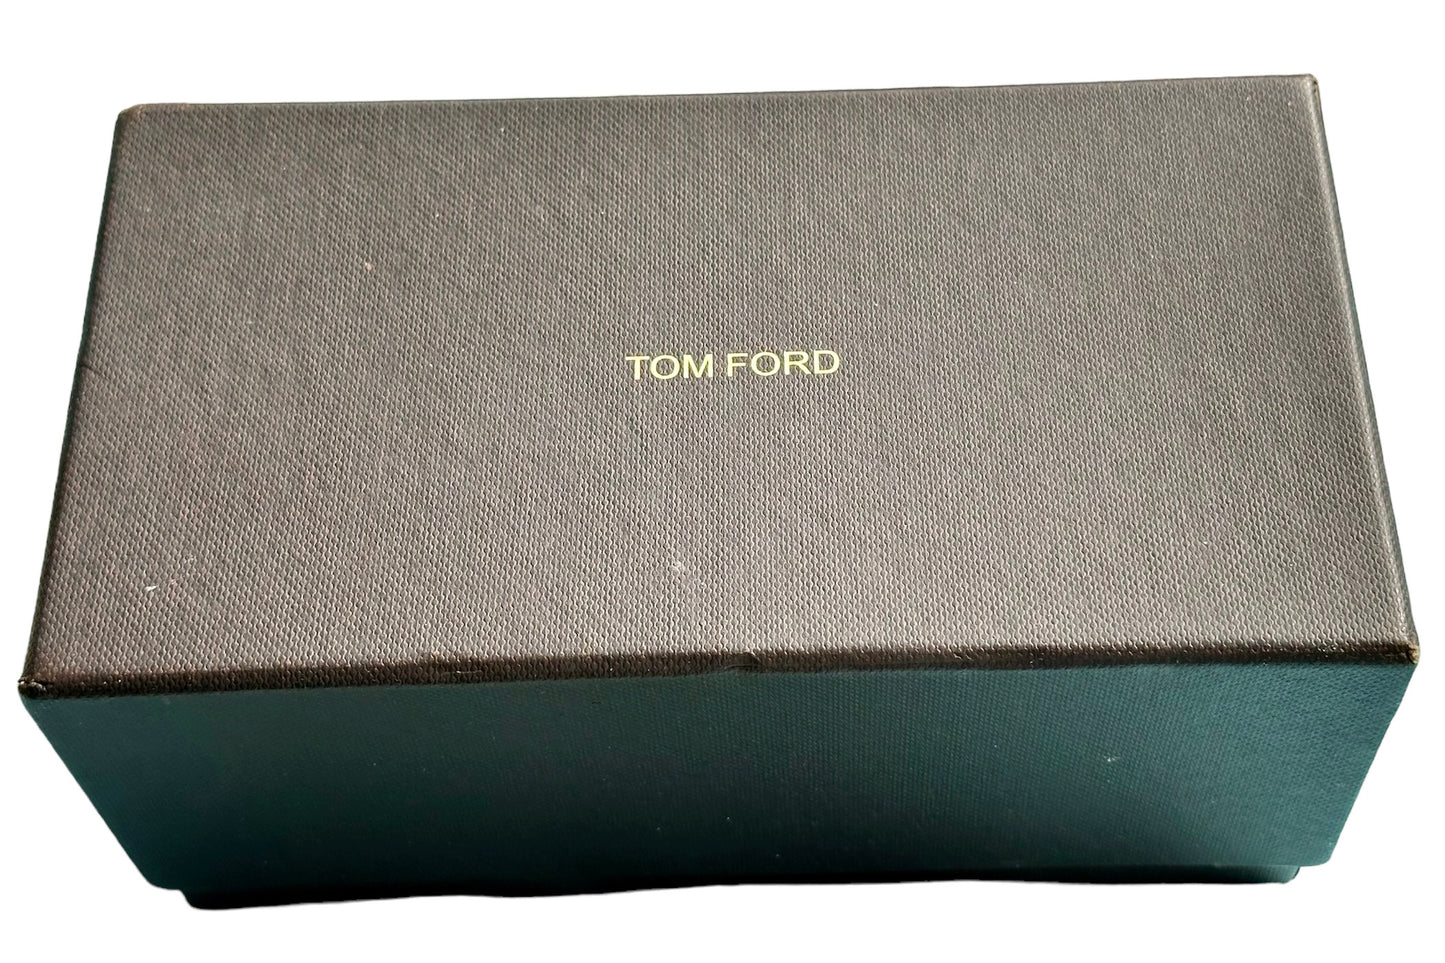 TOM FORD Premium Sunglasses - Made in Italy - New old stock